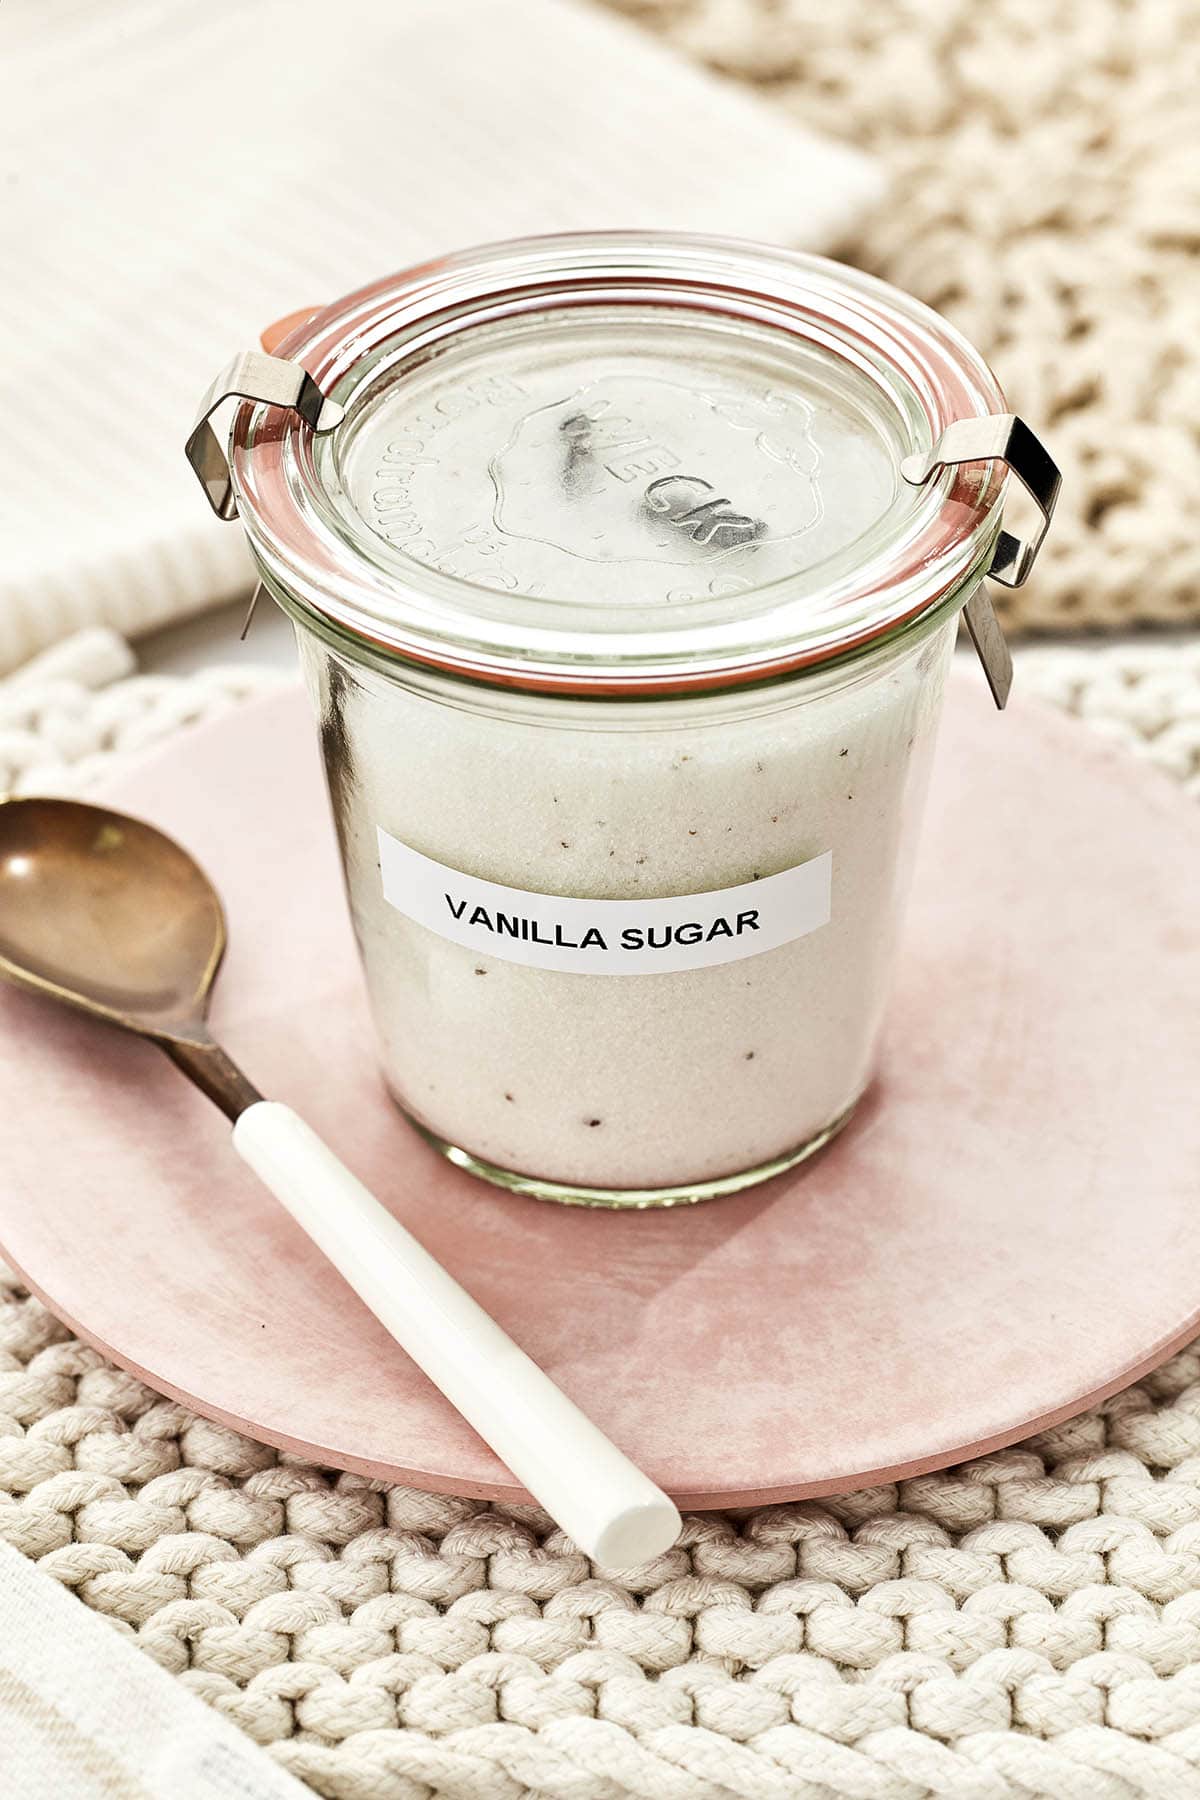 A small glass jar labeled vanilla sugar, filled with sugar, on a pink plate.